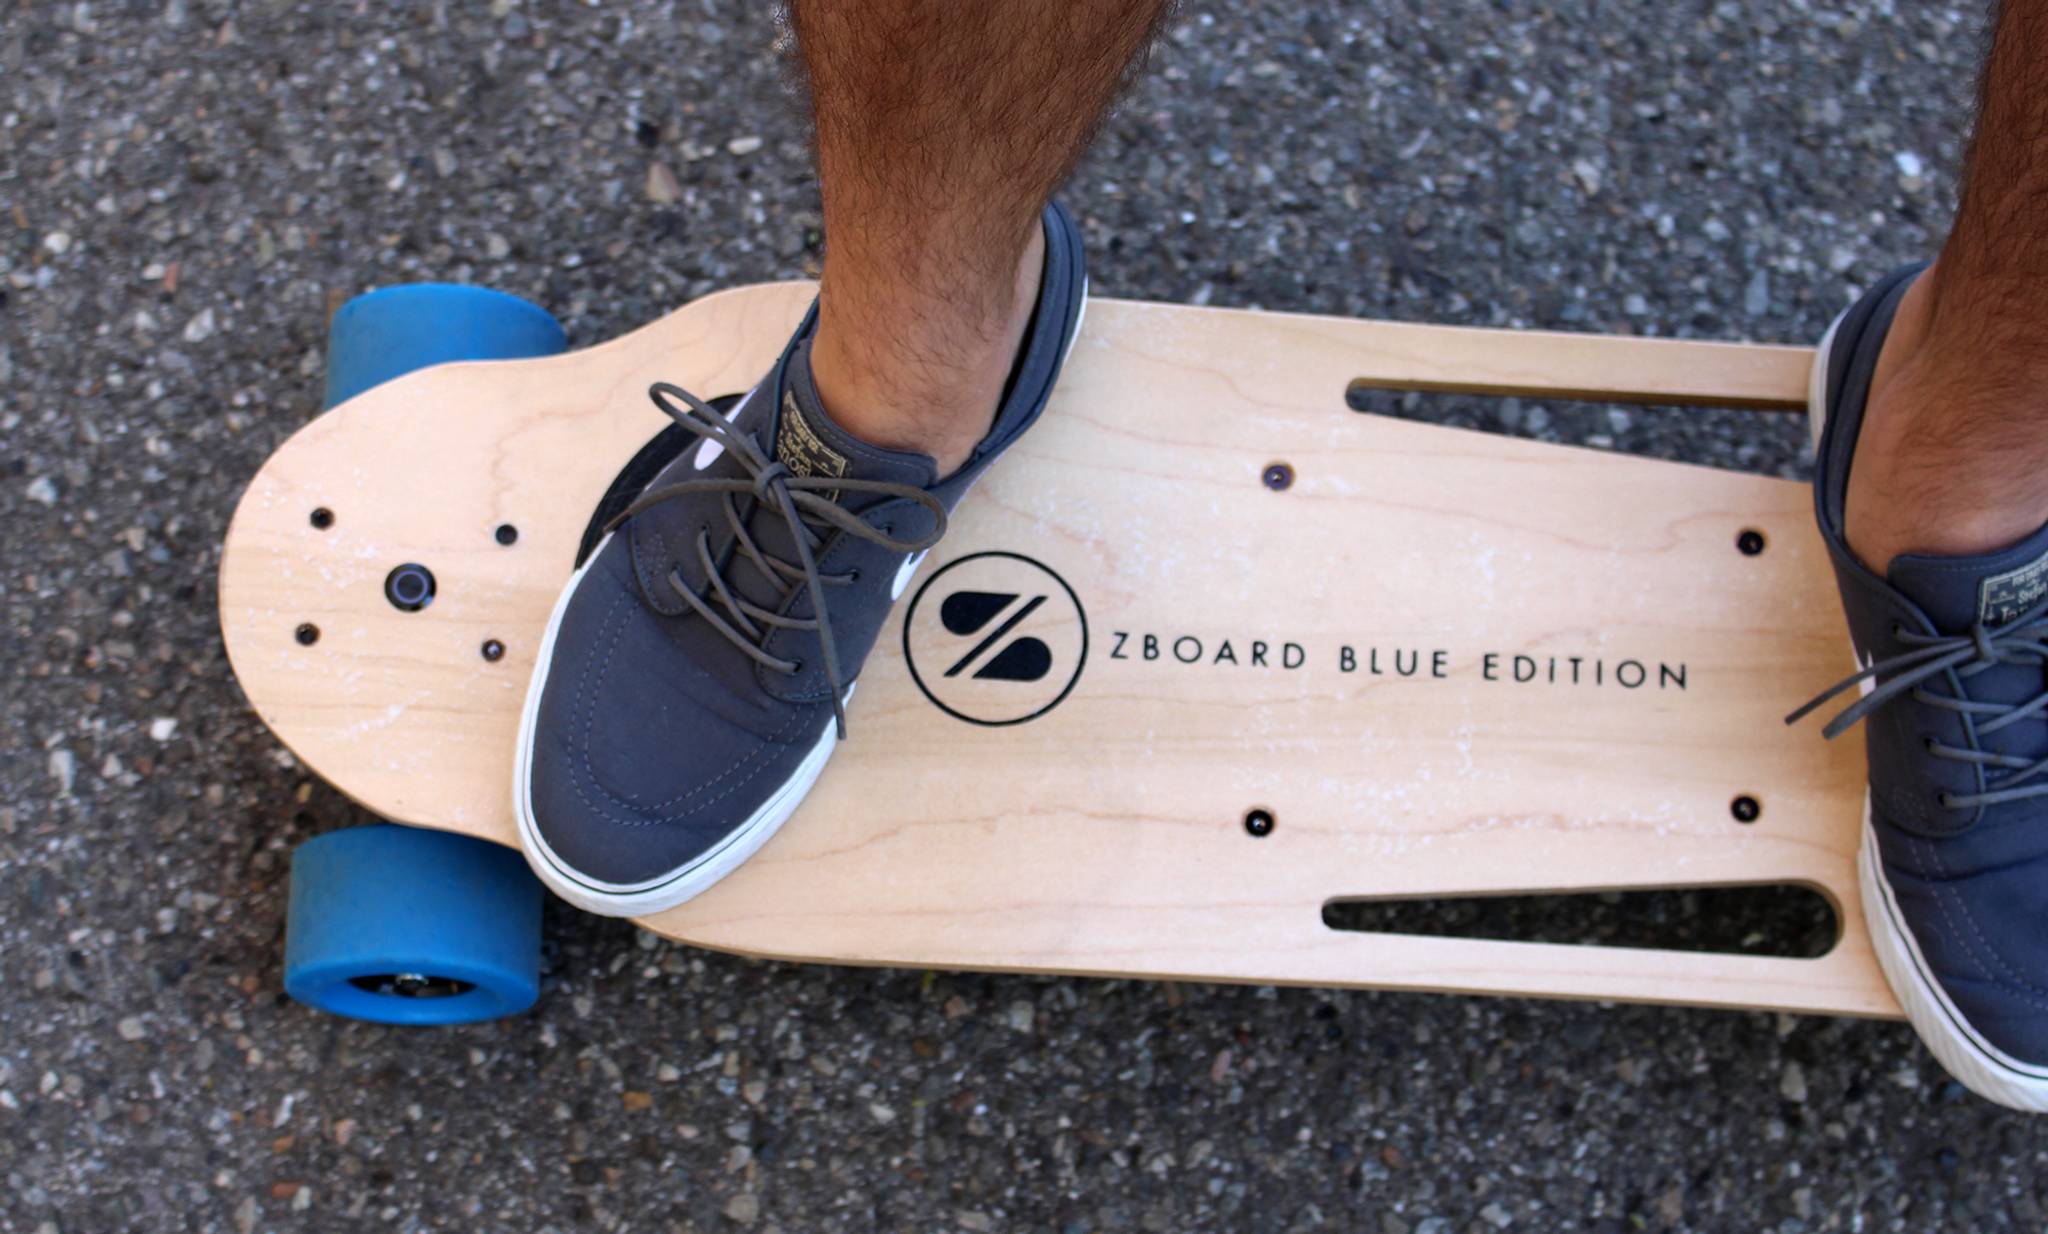 Electric skateboards for an urban future